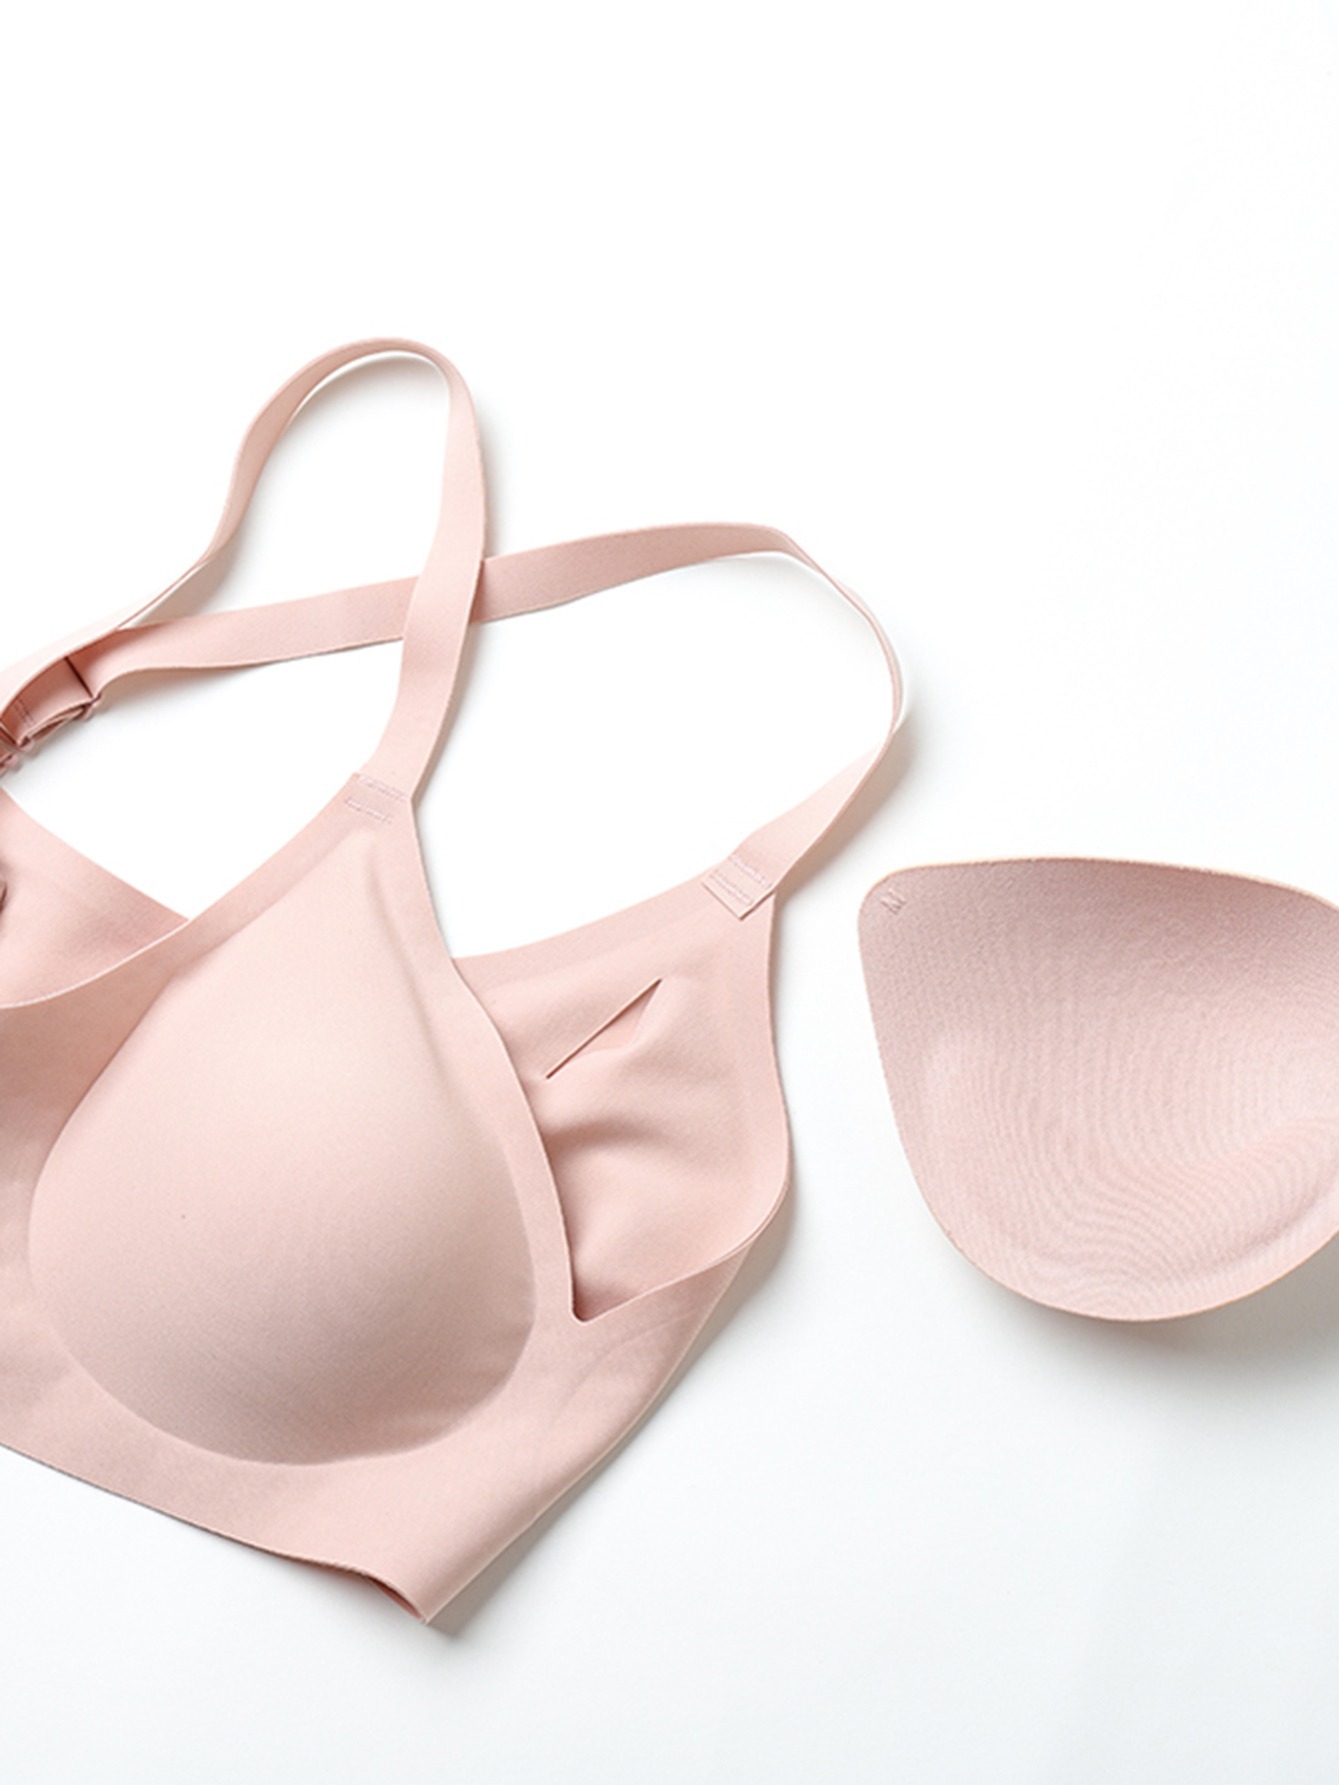 Seamless Push Up Bralette Wirefree, Solid Color, Cheap Sexy Bras For Women  Macaroon Intimates From Choxxxcomb, $9.58